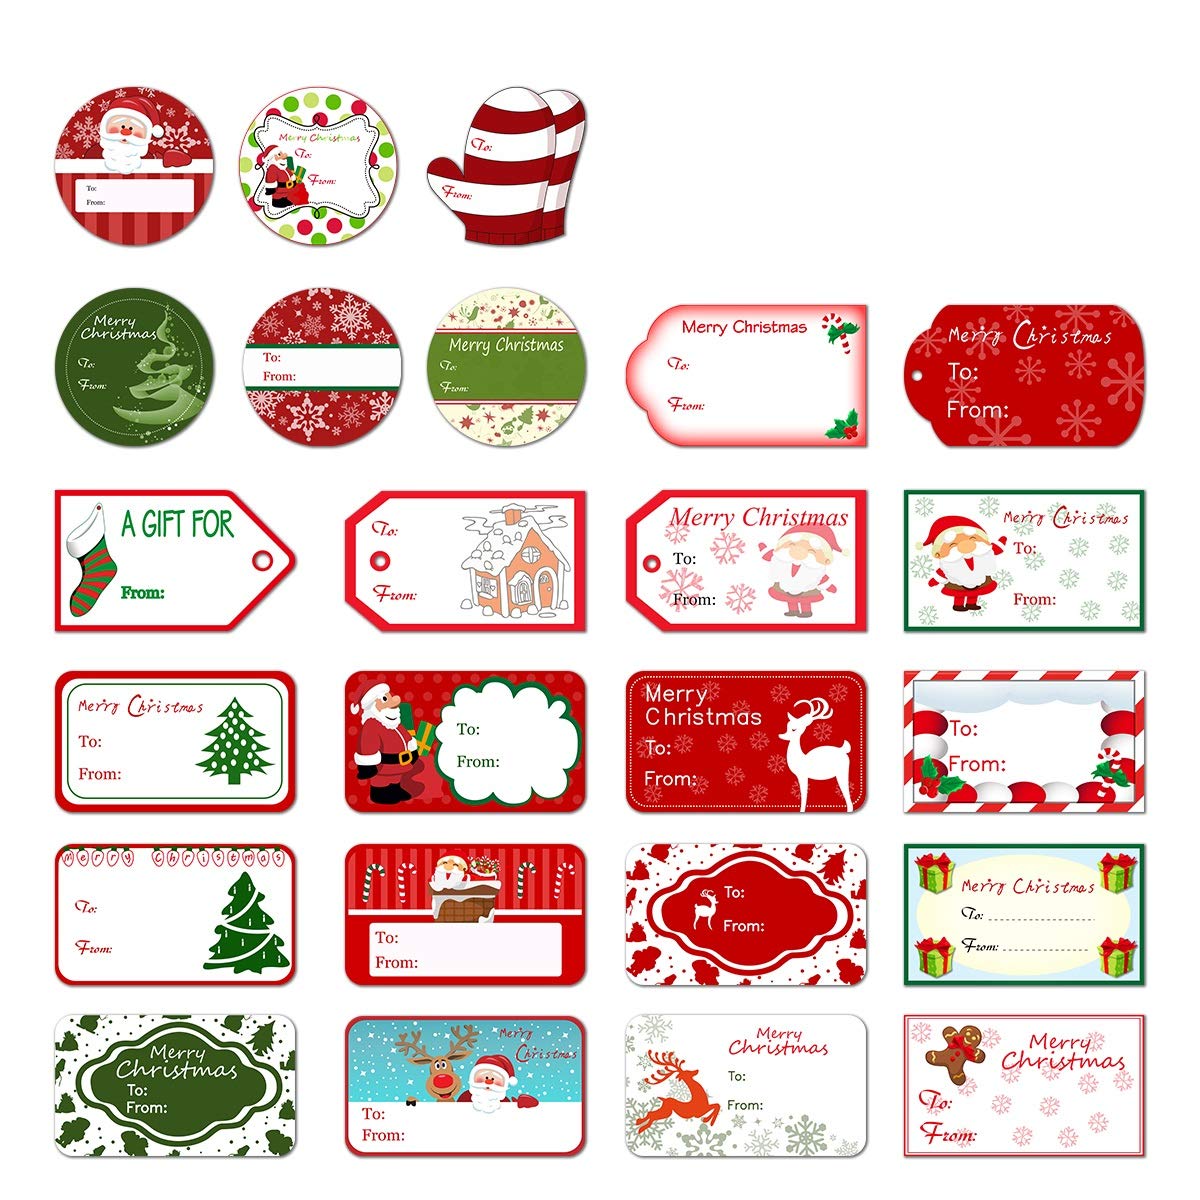 Book Cover Amosfun Christmas Self Adhesive Gift Tag Stickers Santa Snowmen Xmas Tree Deer Christmas Festival Birthday Wedding Holiday Decorative Presents Labels Decals Christmas Gift for friends 144 pack